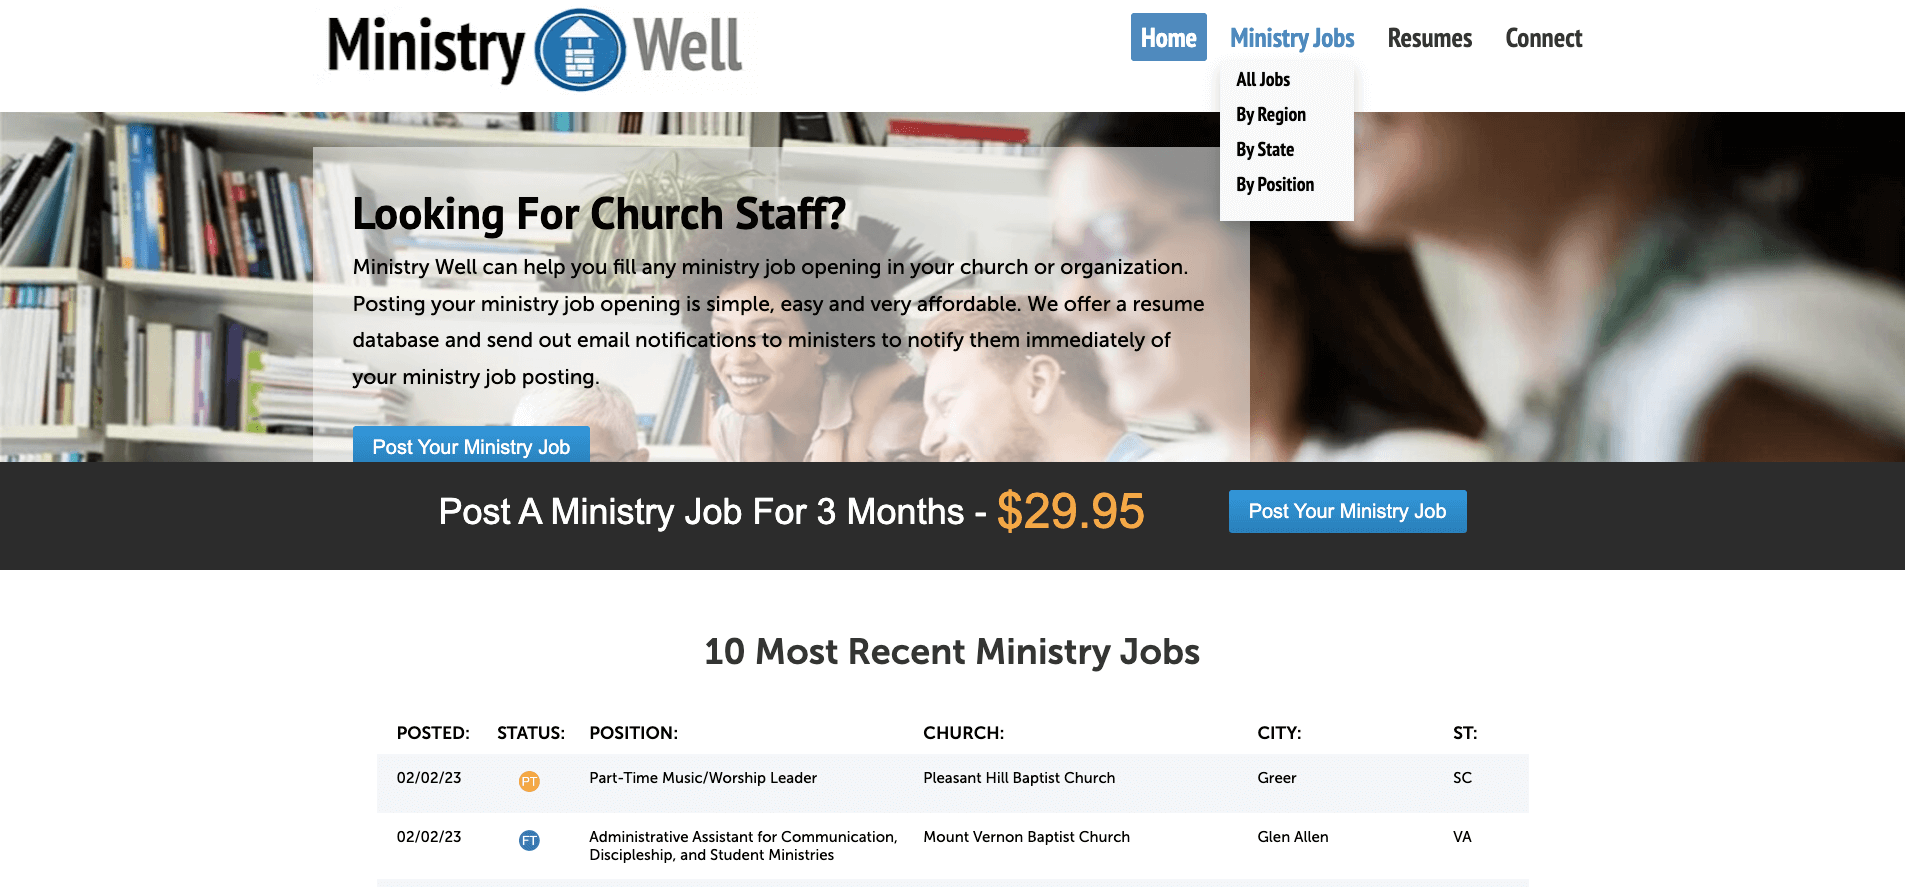 Ministry Well